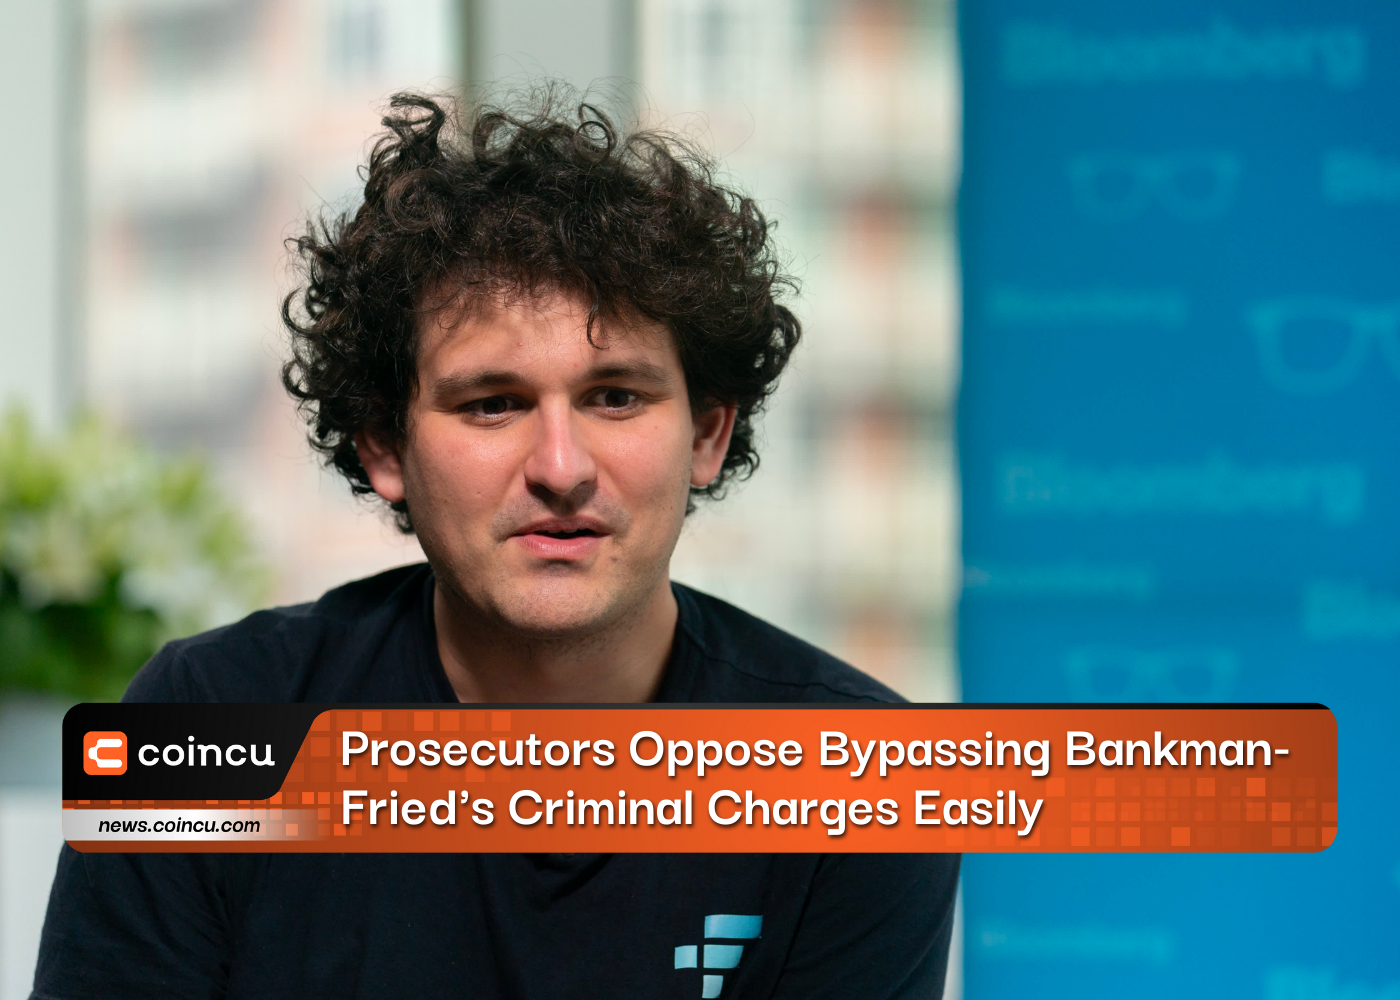 Prosecutors Oppose Bypassing Bankman-Fried's Criminal Charges Easily